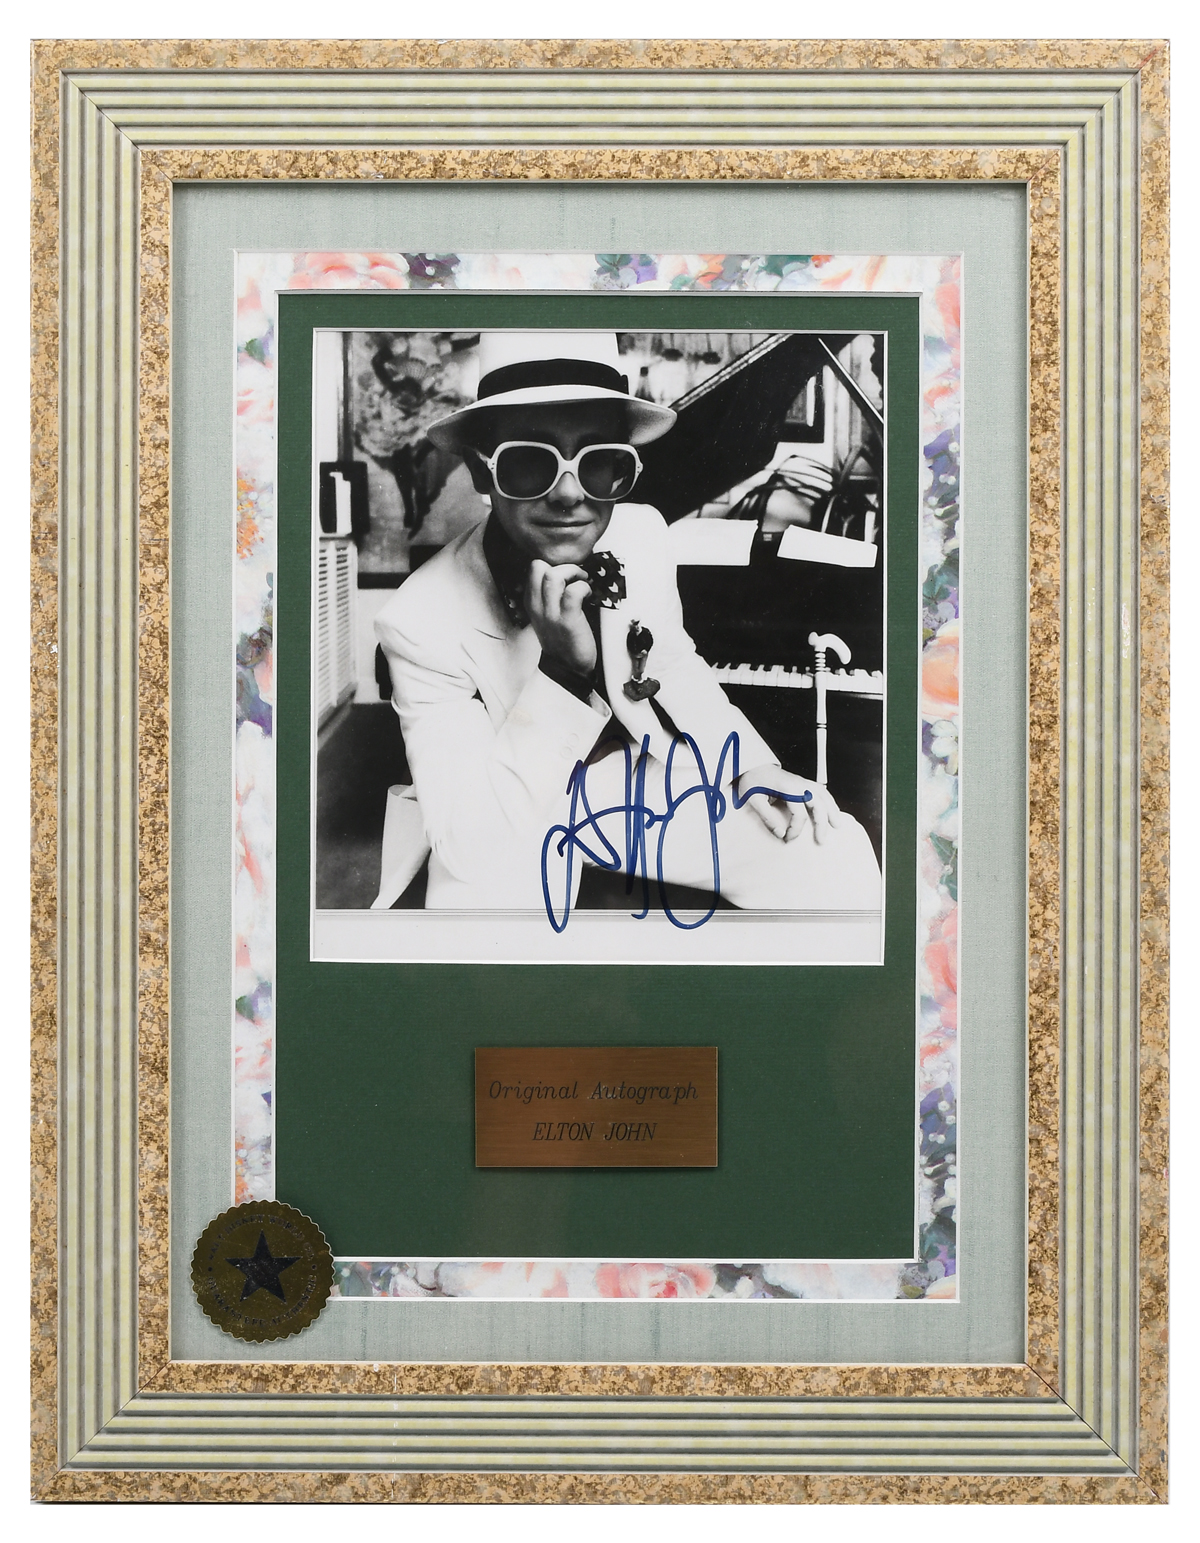 SIGNED CERTIFIED PHOTOGRAPH OF